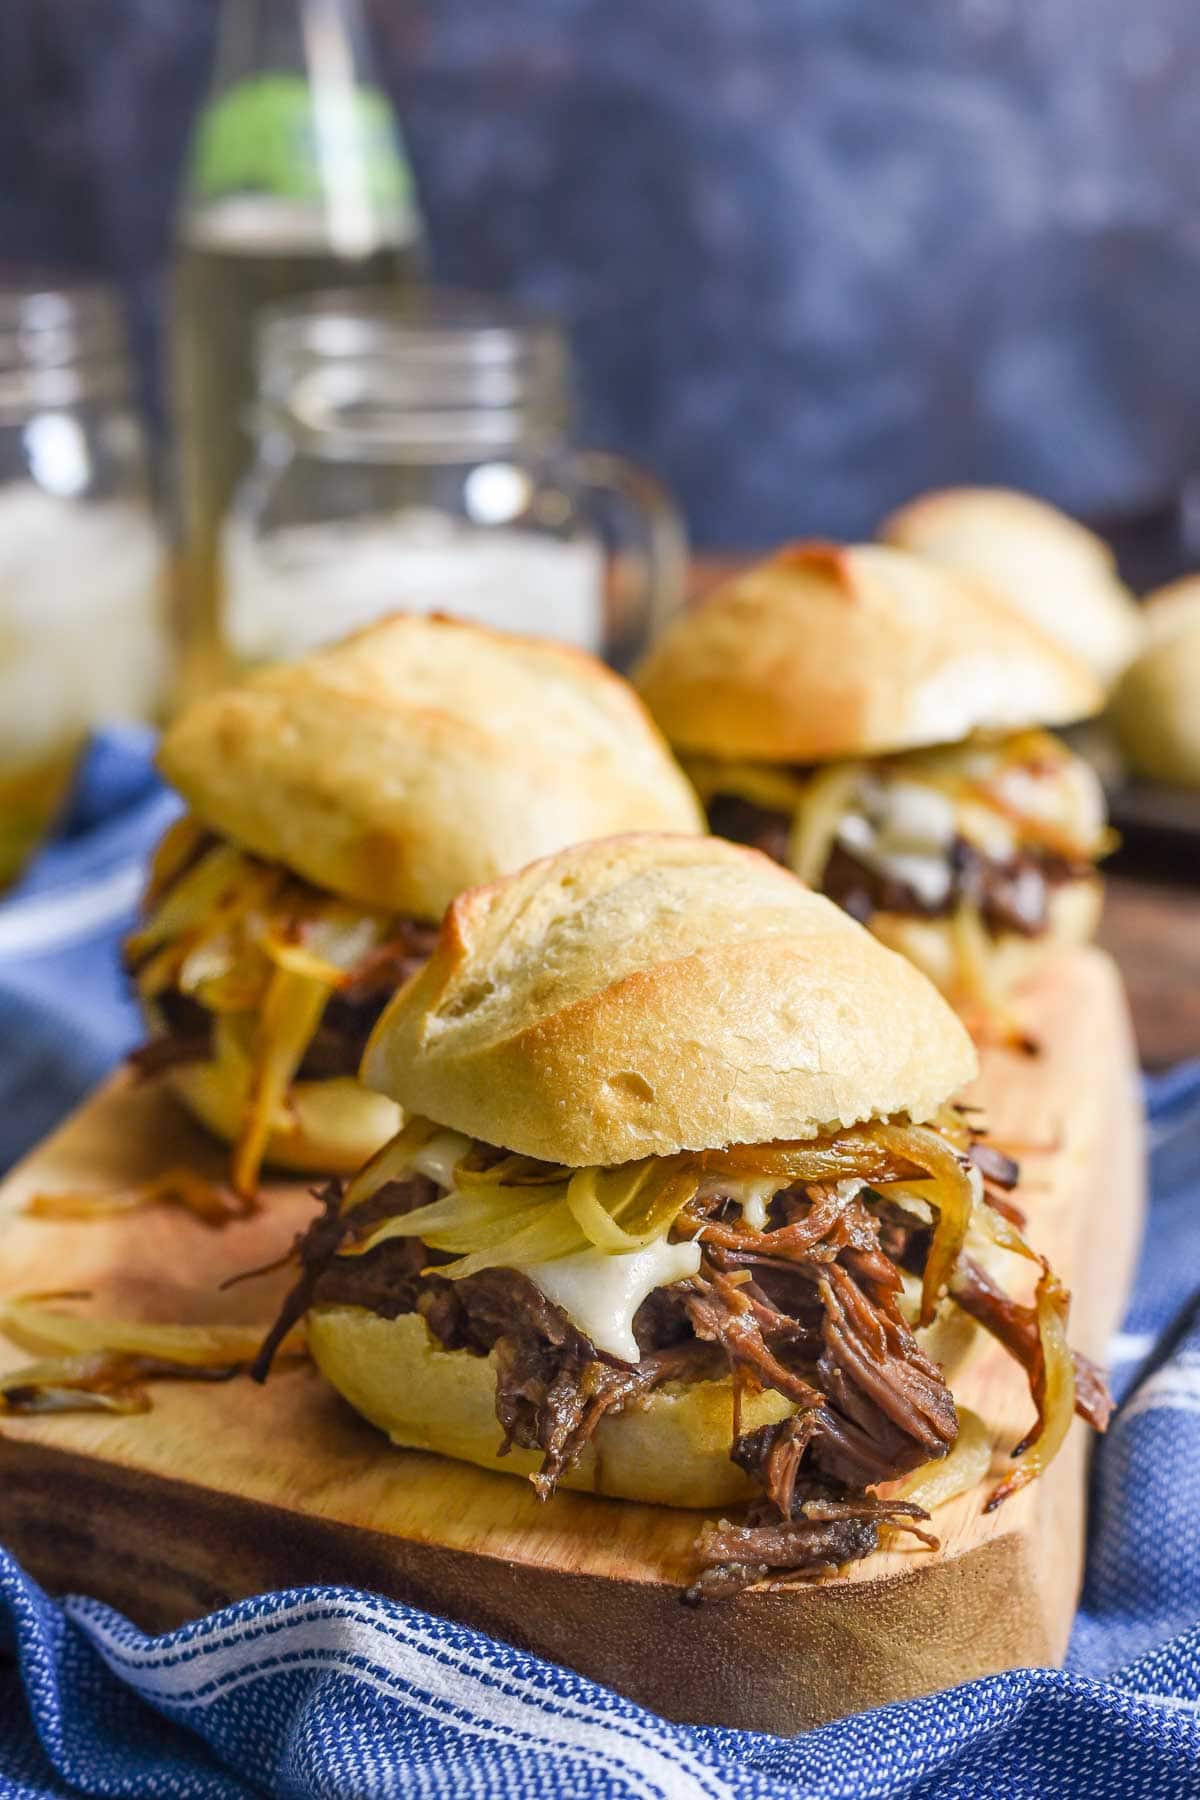 Next time you make roast, make sure to prepare enough to make these Leftover Pot Roast Sandwiches. Loaded with cheese and caramelized onions, these are SO GOOD!